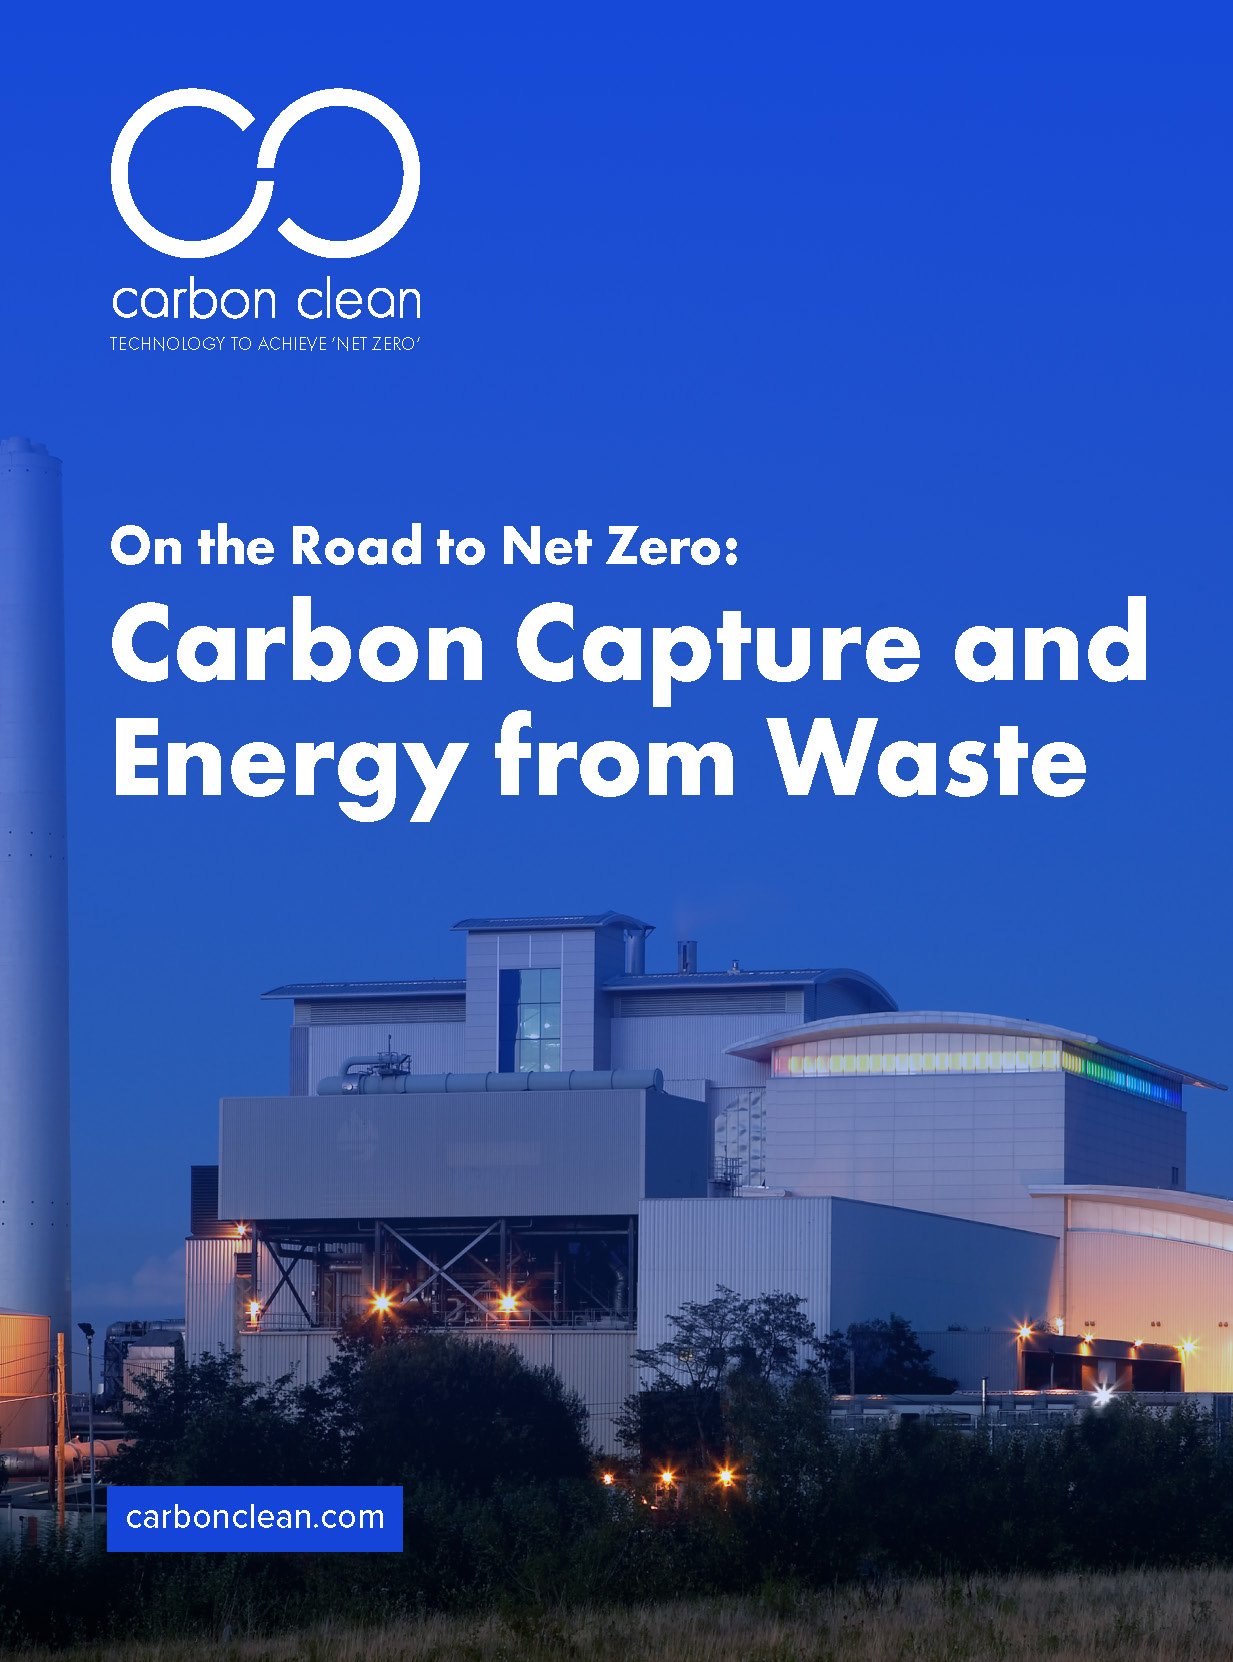 Carbon Capture and Energy from Waste  | Carbon Clean Image